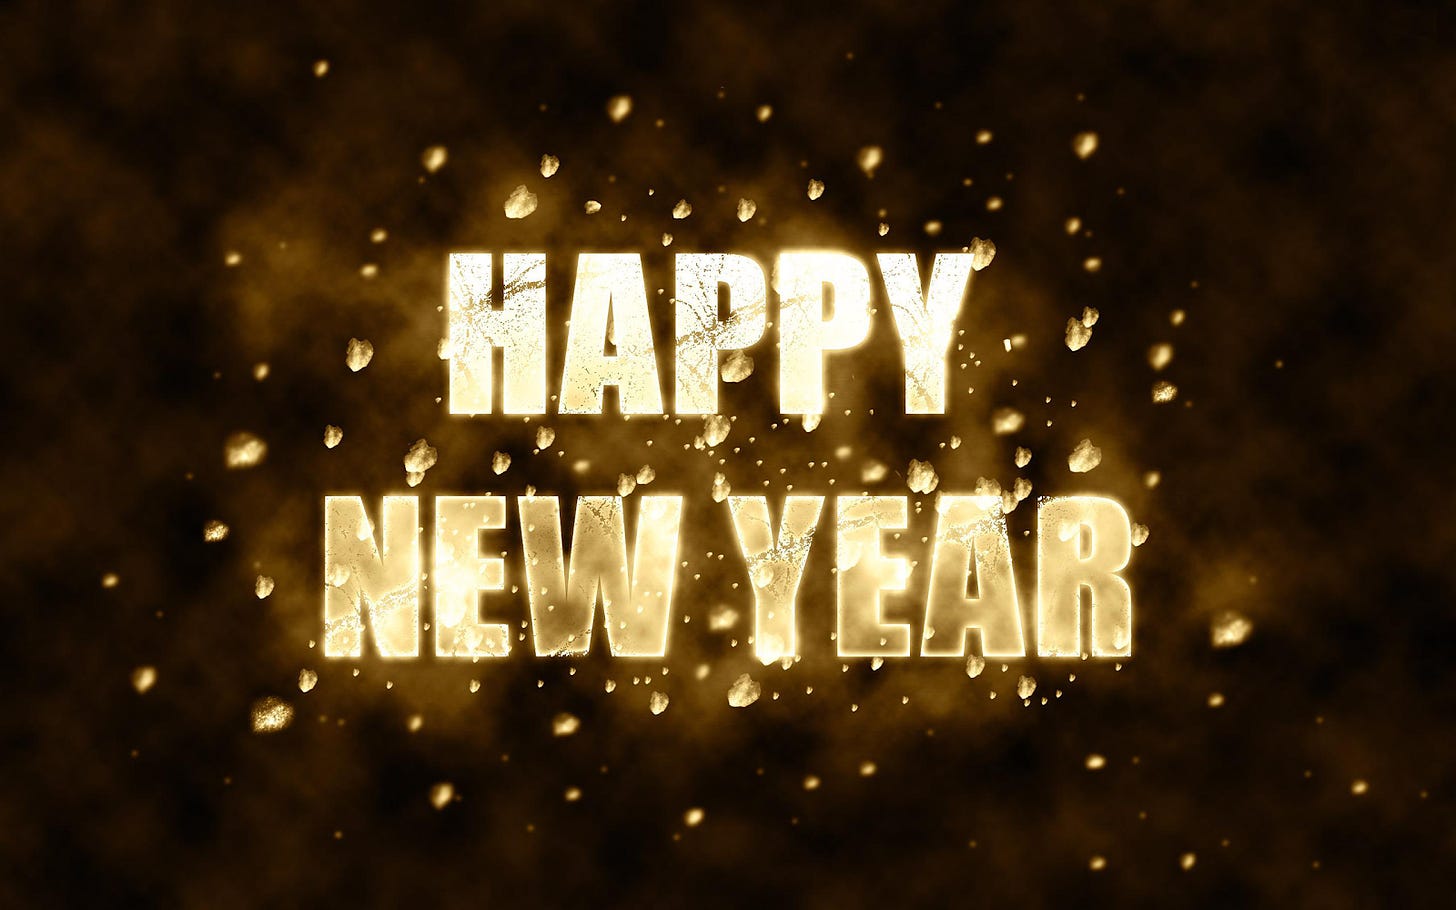 Happy New Year Backgrounds | HD Wallpapers, Backgrounds, Images, Art Photos.